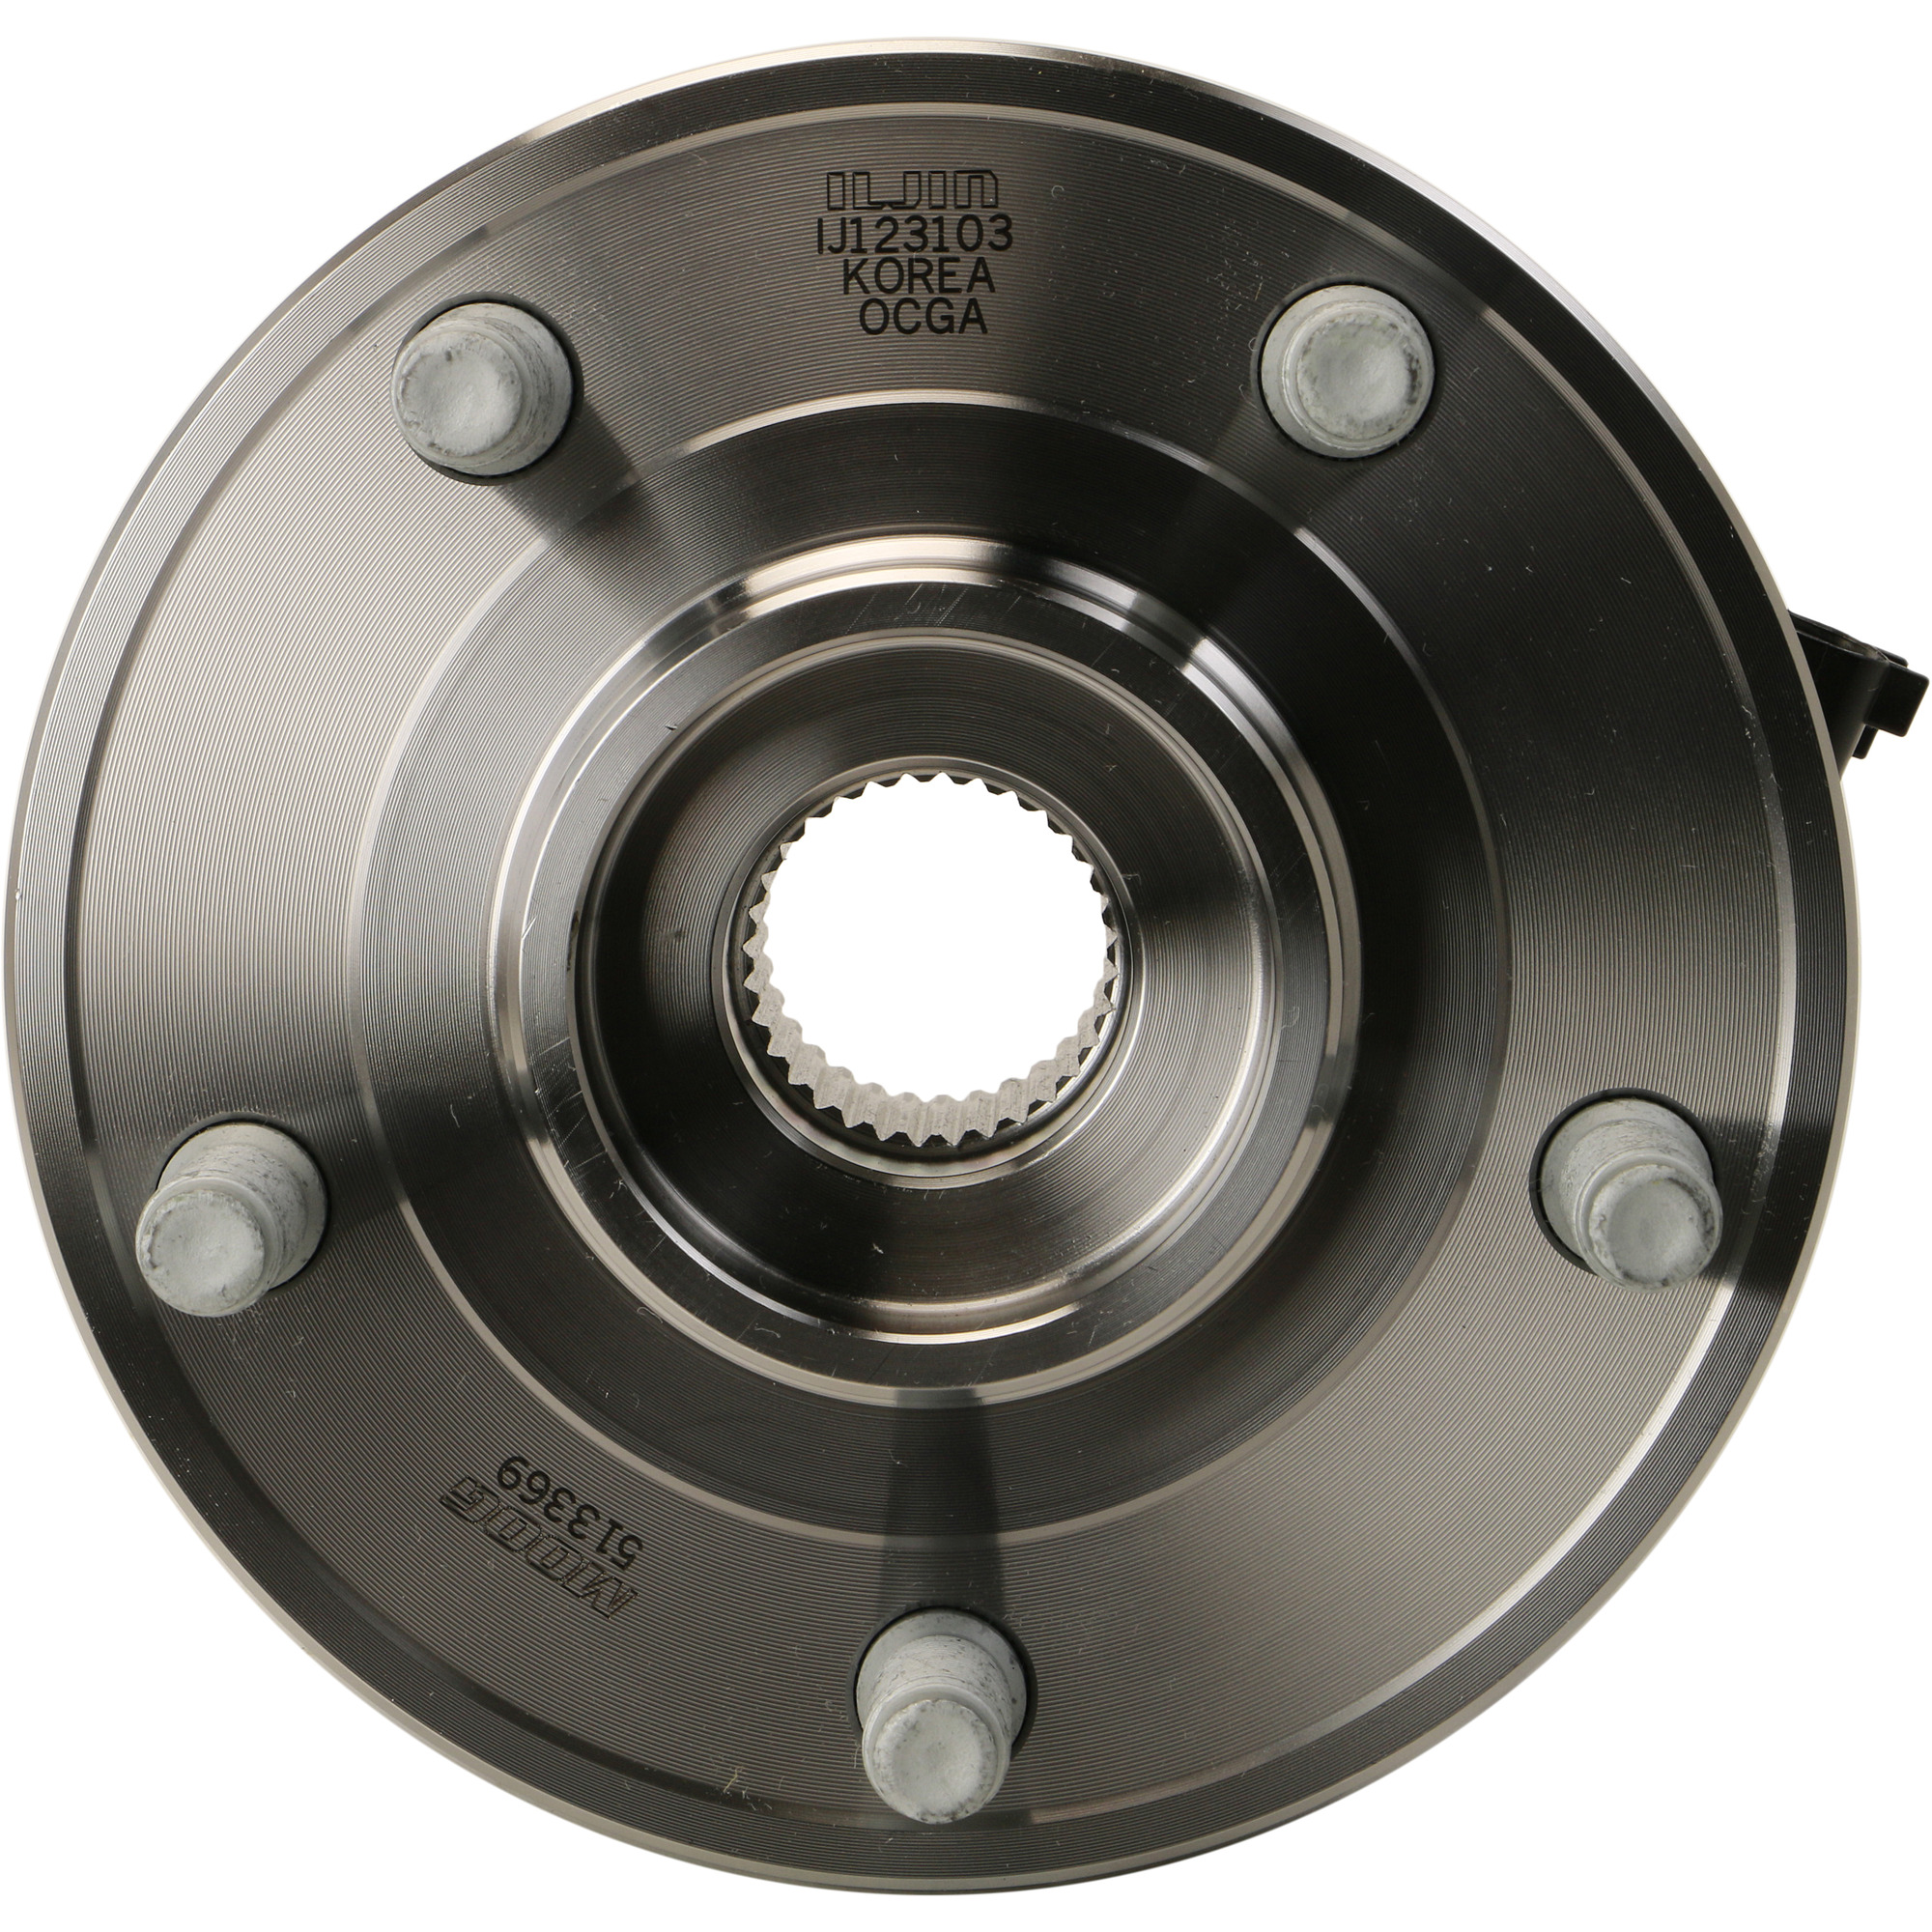 MOOG 513369 Wheel Bearing and Hub Assembly Fits select: 2015-2018 JEEP WRANGLER UNLIMITED, 2012-2014 JEEP WRANGLER - image 3 of 5